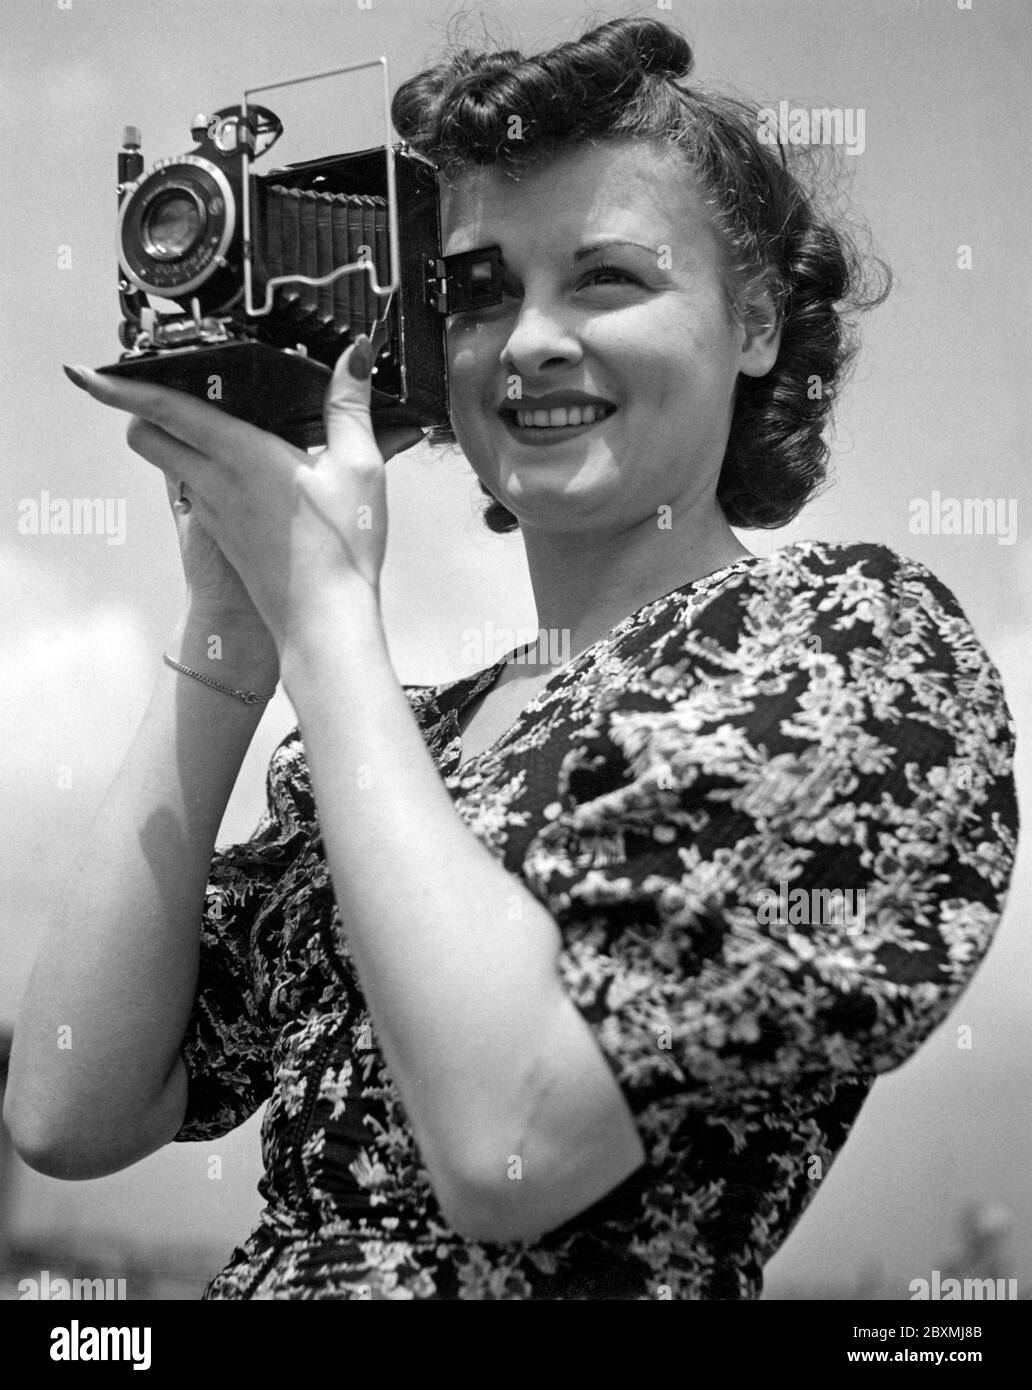 Amateur photographer in the 1940s. A young woman is photographing on a summer day. The camera model is practical. When not using it, the lense and bellow is folded into the camera body. To take pictures you opened it and was ready to go. The camera produced analog film. Stock Photo